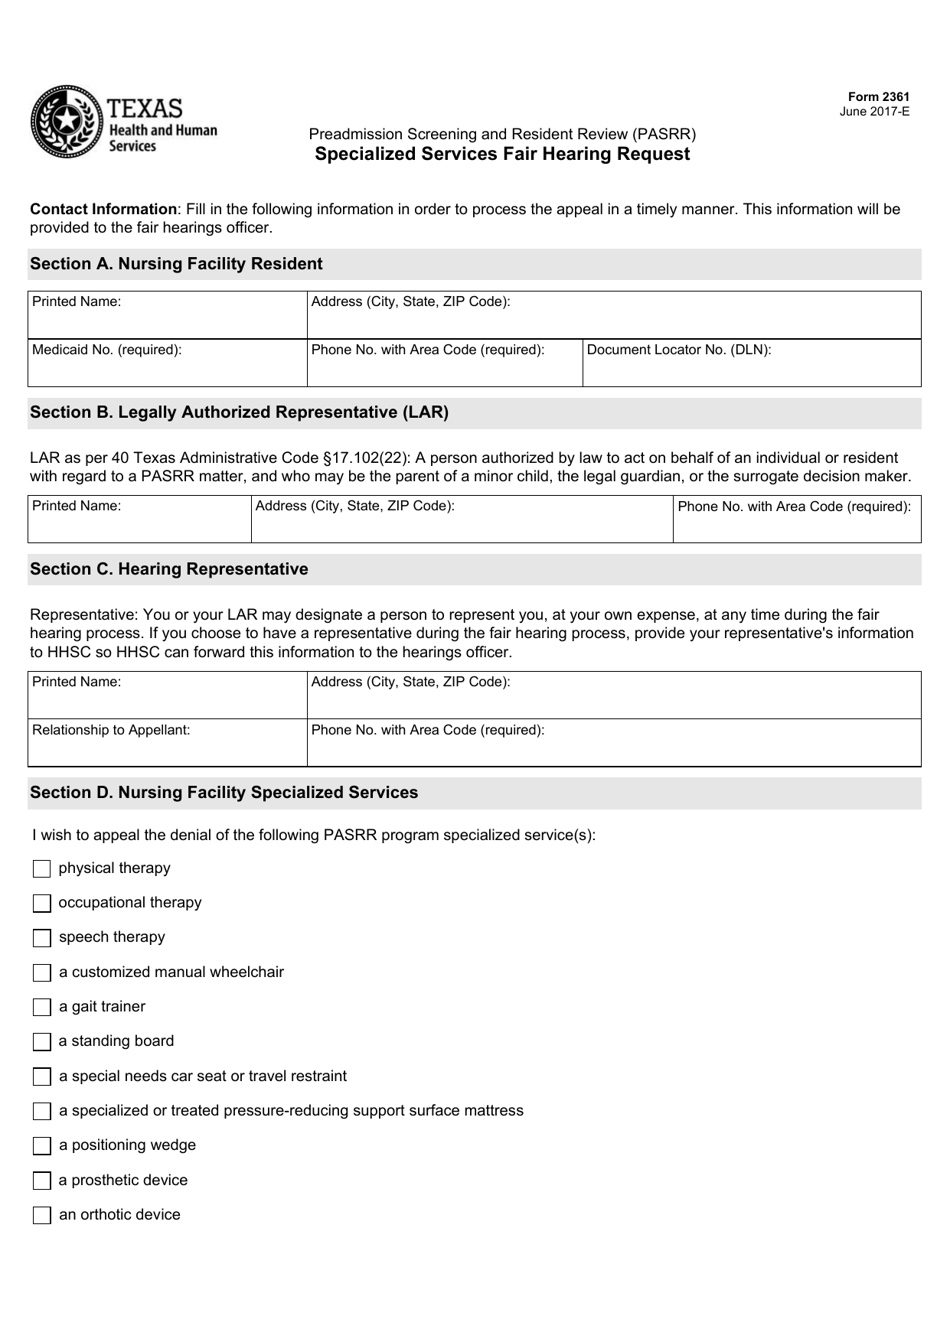 Form 2361 Preadmission Screening and Resident Review (Pasrr) Specialized Services Fair Hearing Request - Texas, Page 1